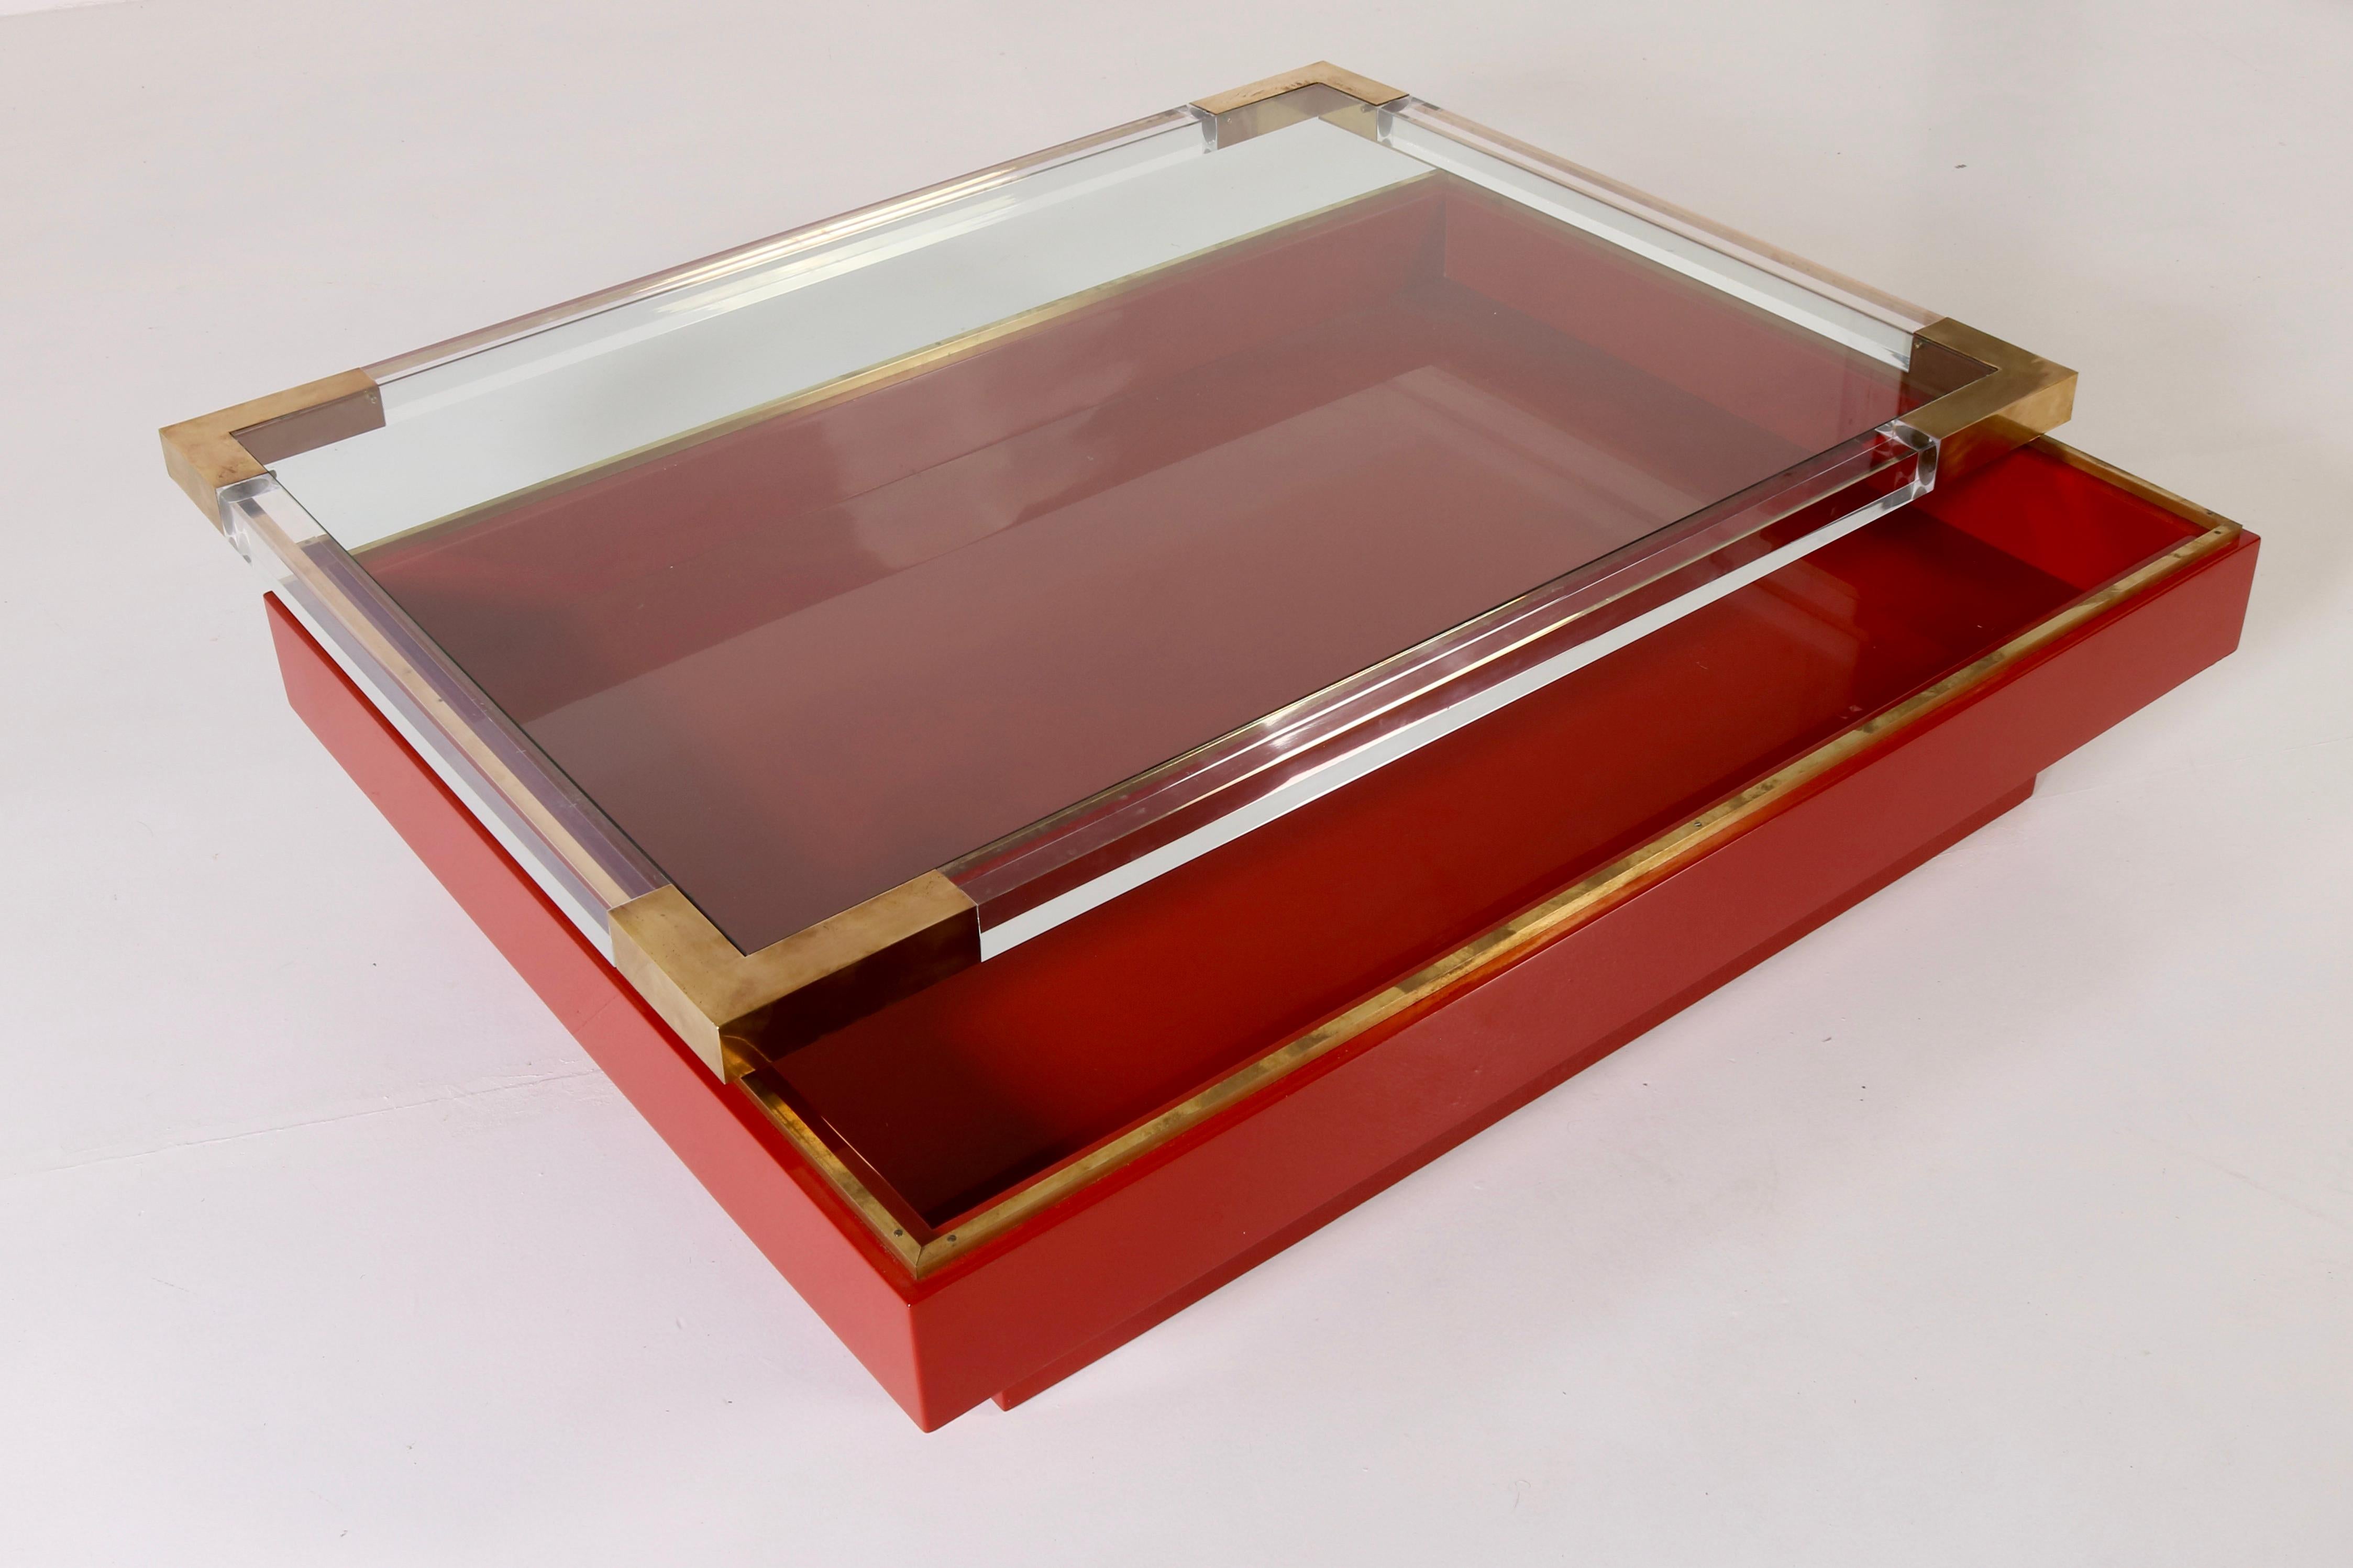 Stunning Sliding Top Low Table in Red and Gold by Romeo Rega, Italian Design 70s For Sale 2